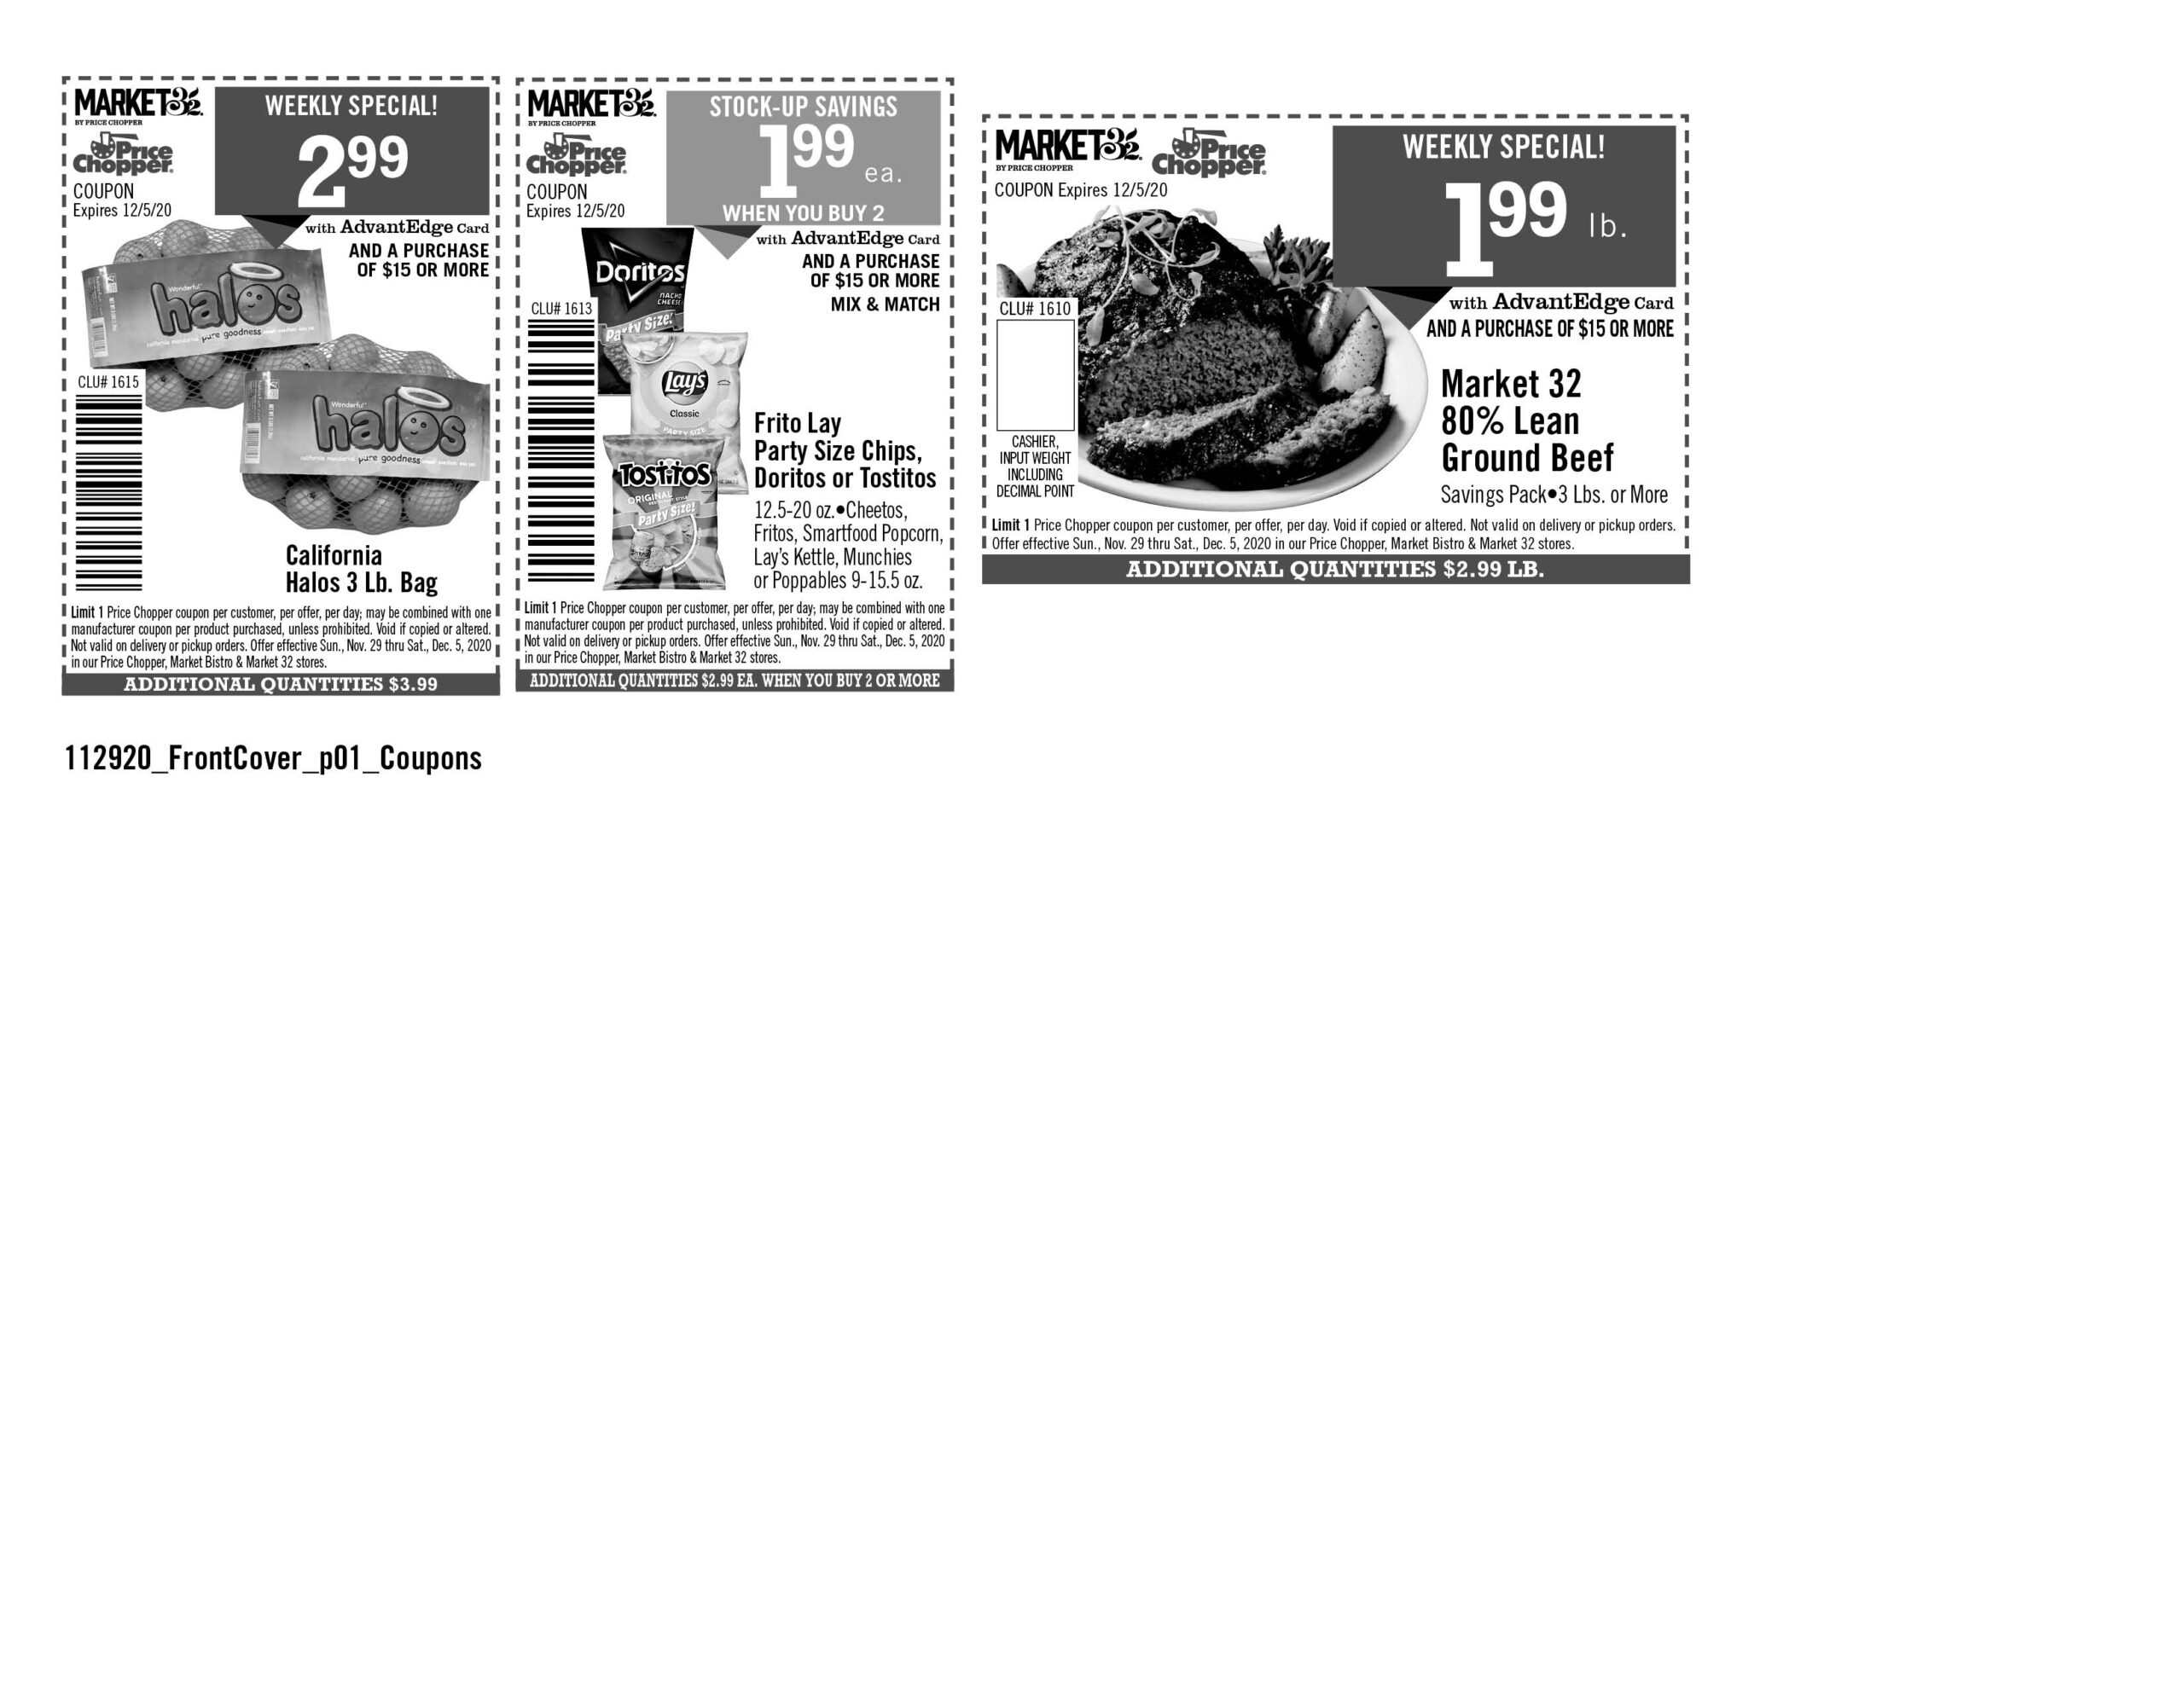 price chopper coupons